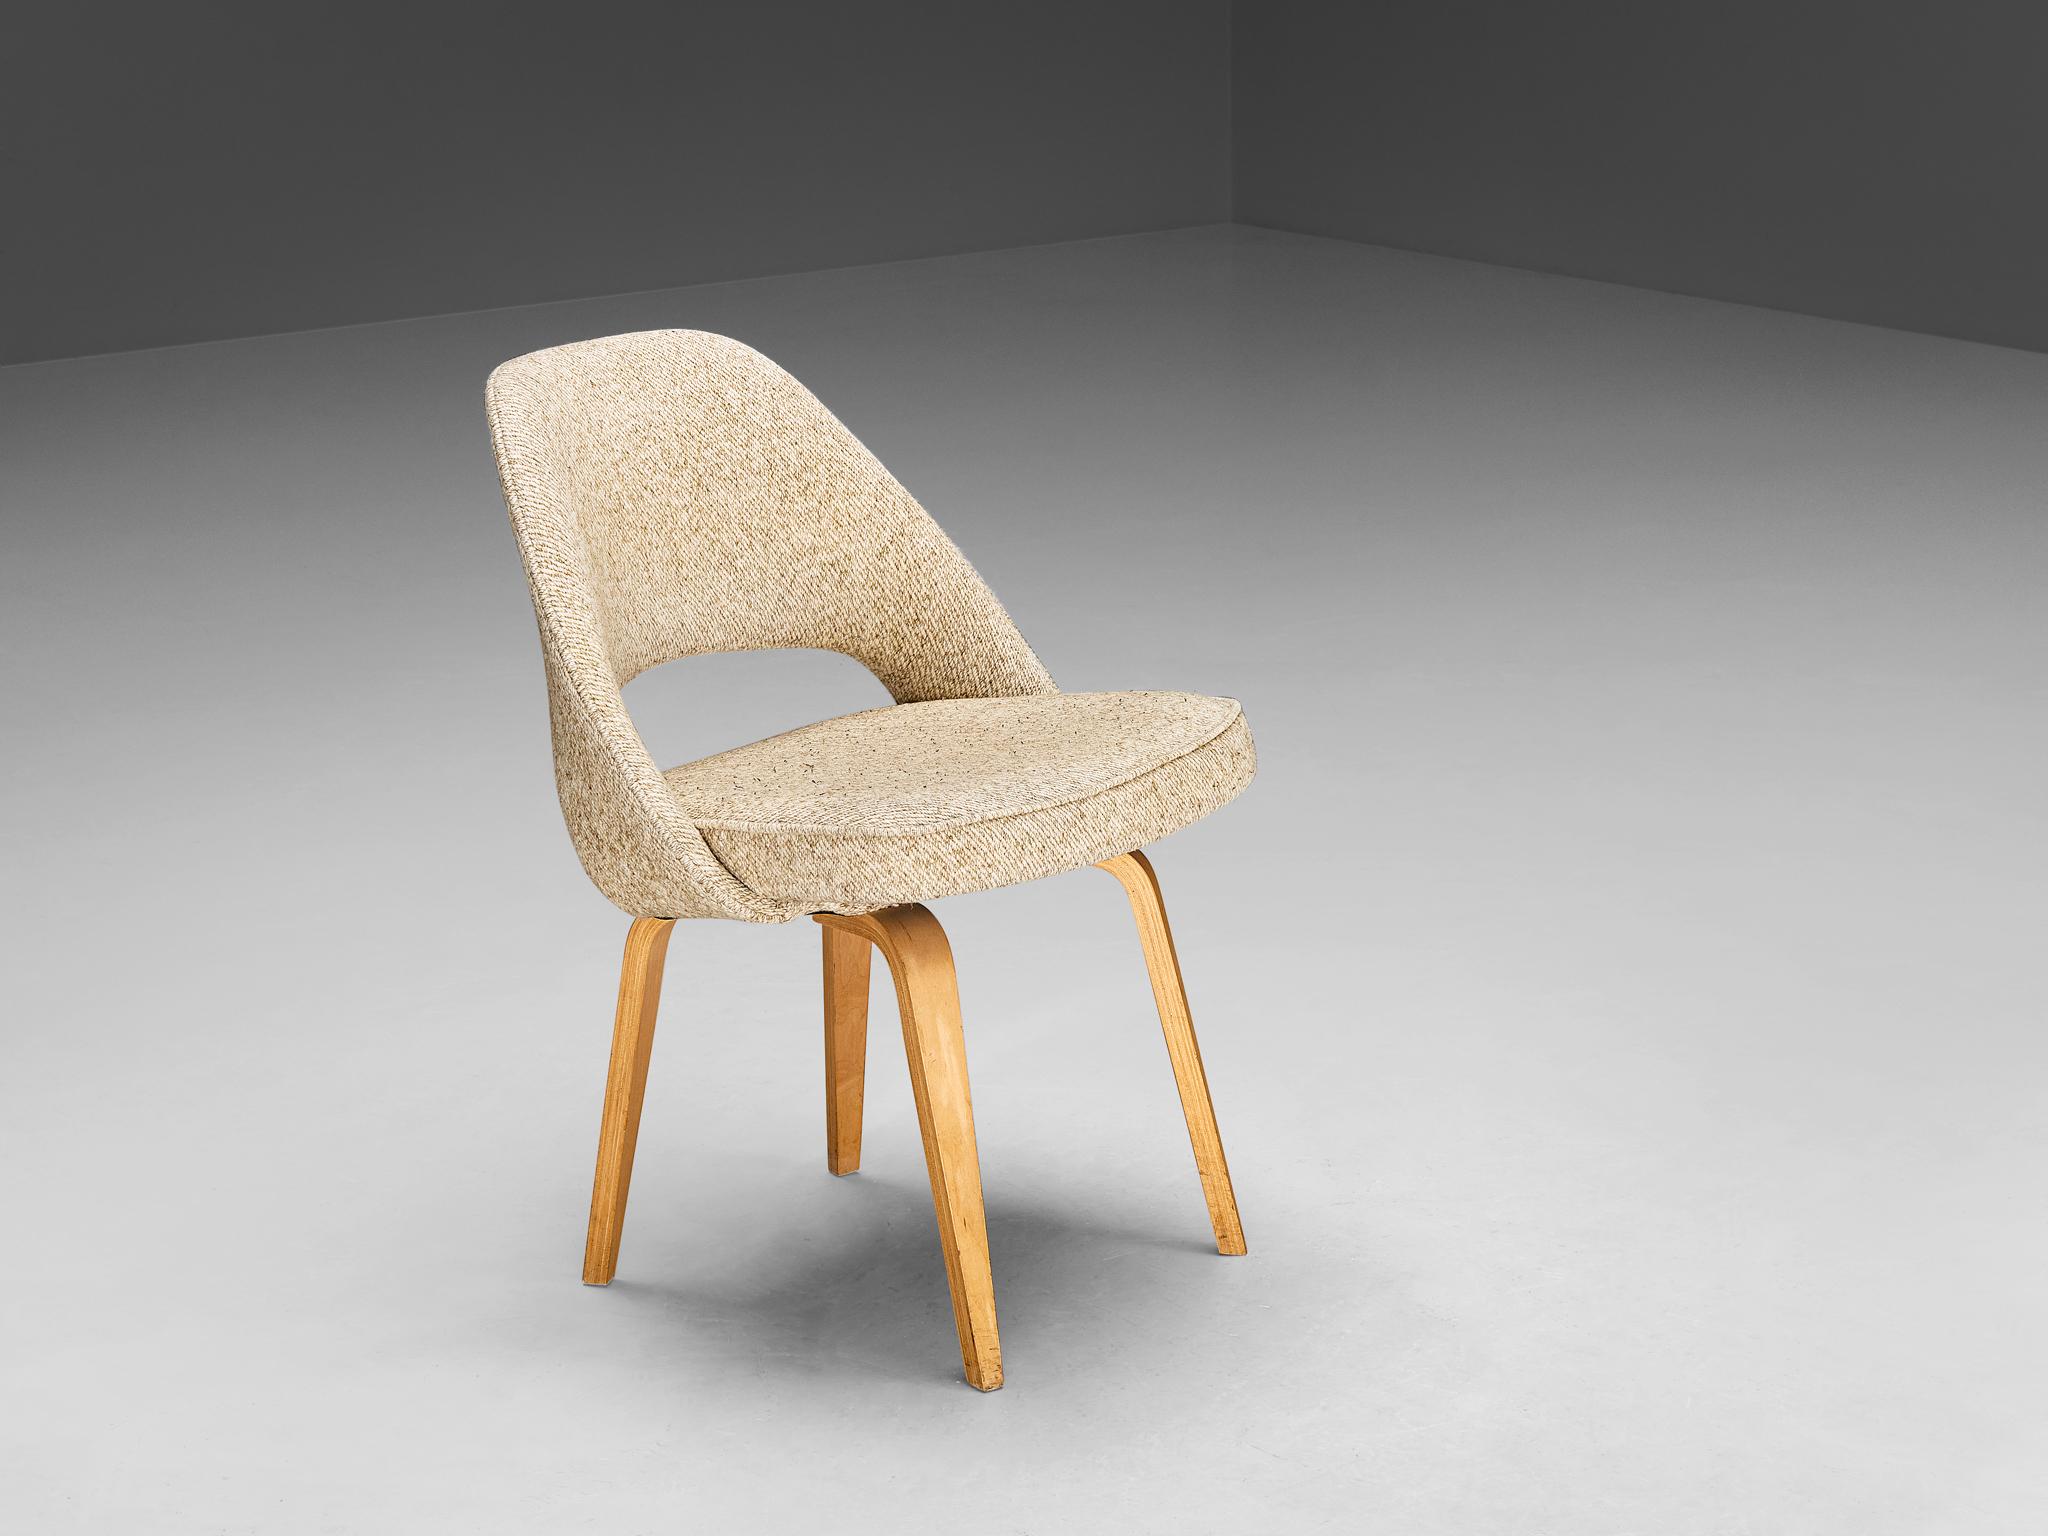 American Eero Saarinen for Knoll 'Executive' Chair in Beige Creme Fabric and Oak  For Sale